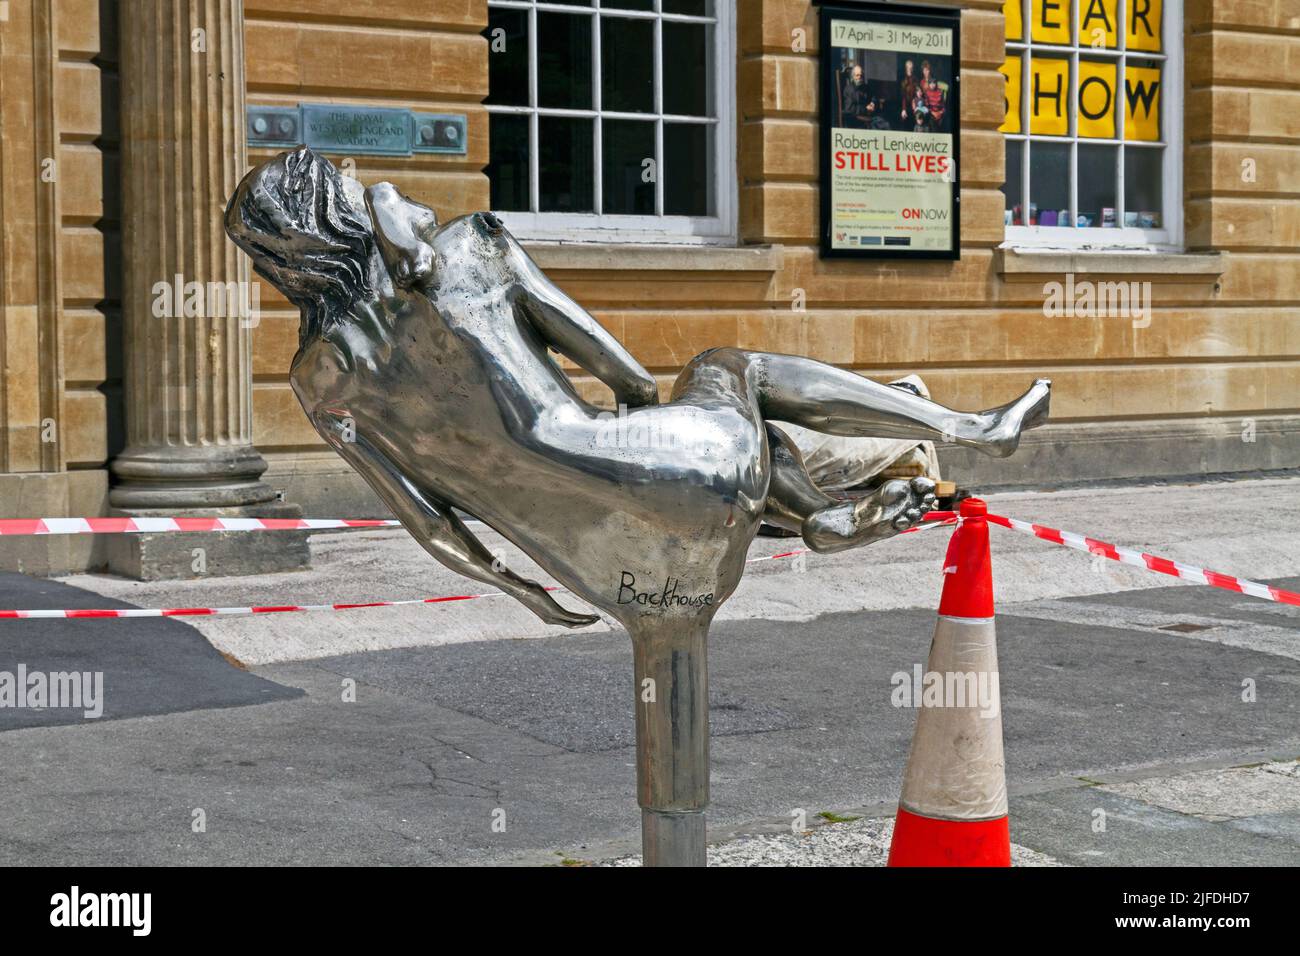 The lower part of David Backhouse’s sculpture “Aspiration” outside the Royal Weston of England Academy in Bristol, UK on 31 May 2011. The sculpture had been broken when a vandal climbed on it several days earlier. Stock Photo